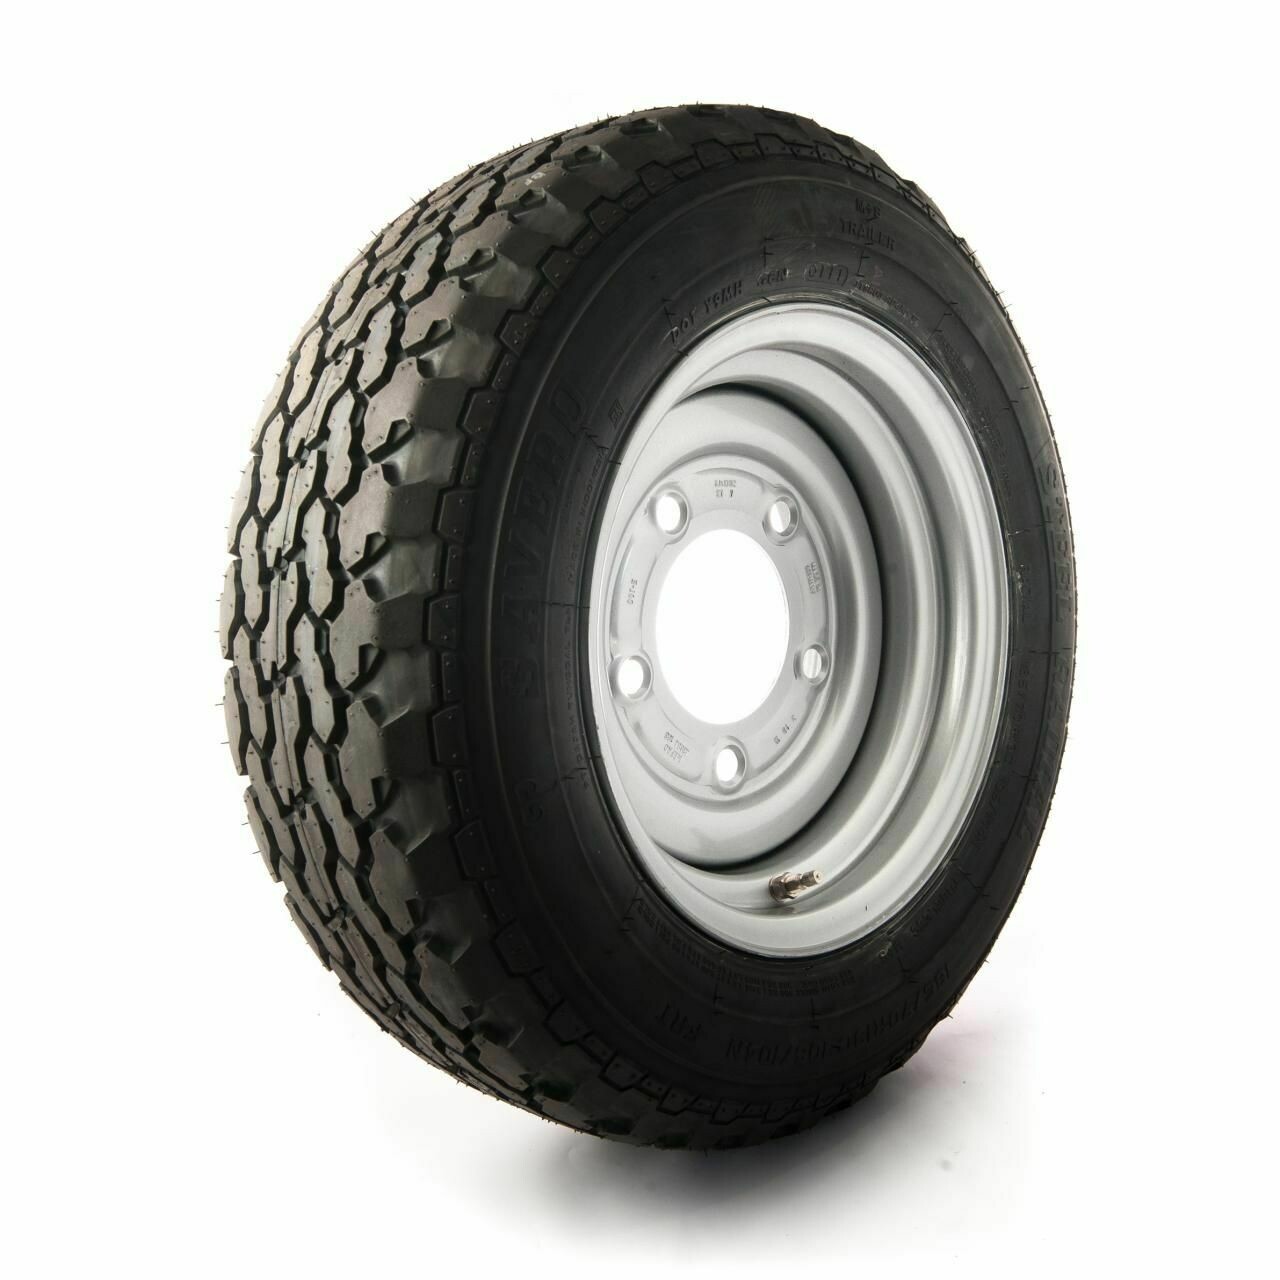 185 R 13 8ply (5 x 6.5 inch pcd) trailer wheel and tyre